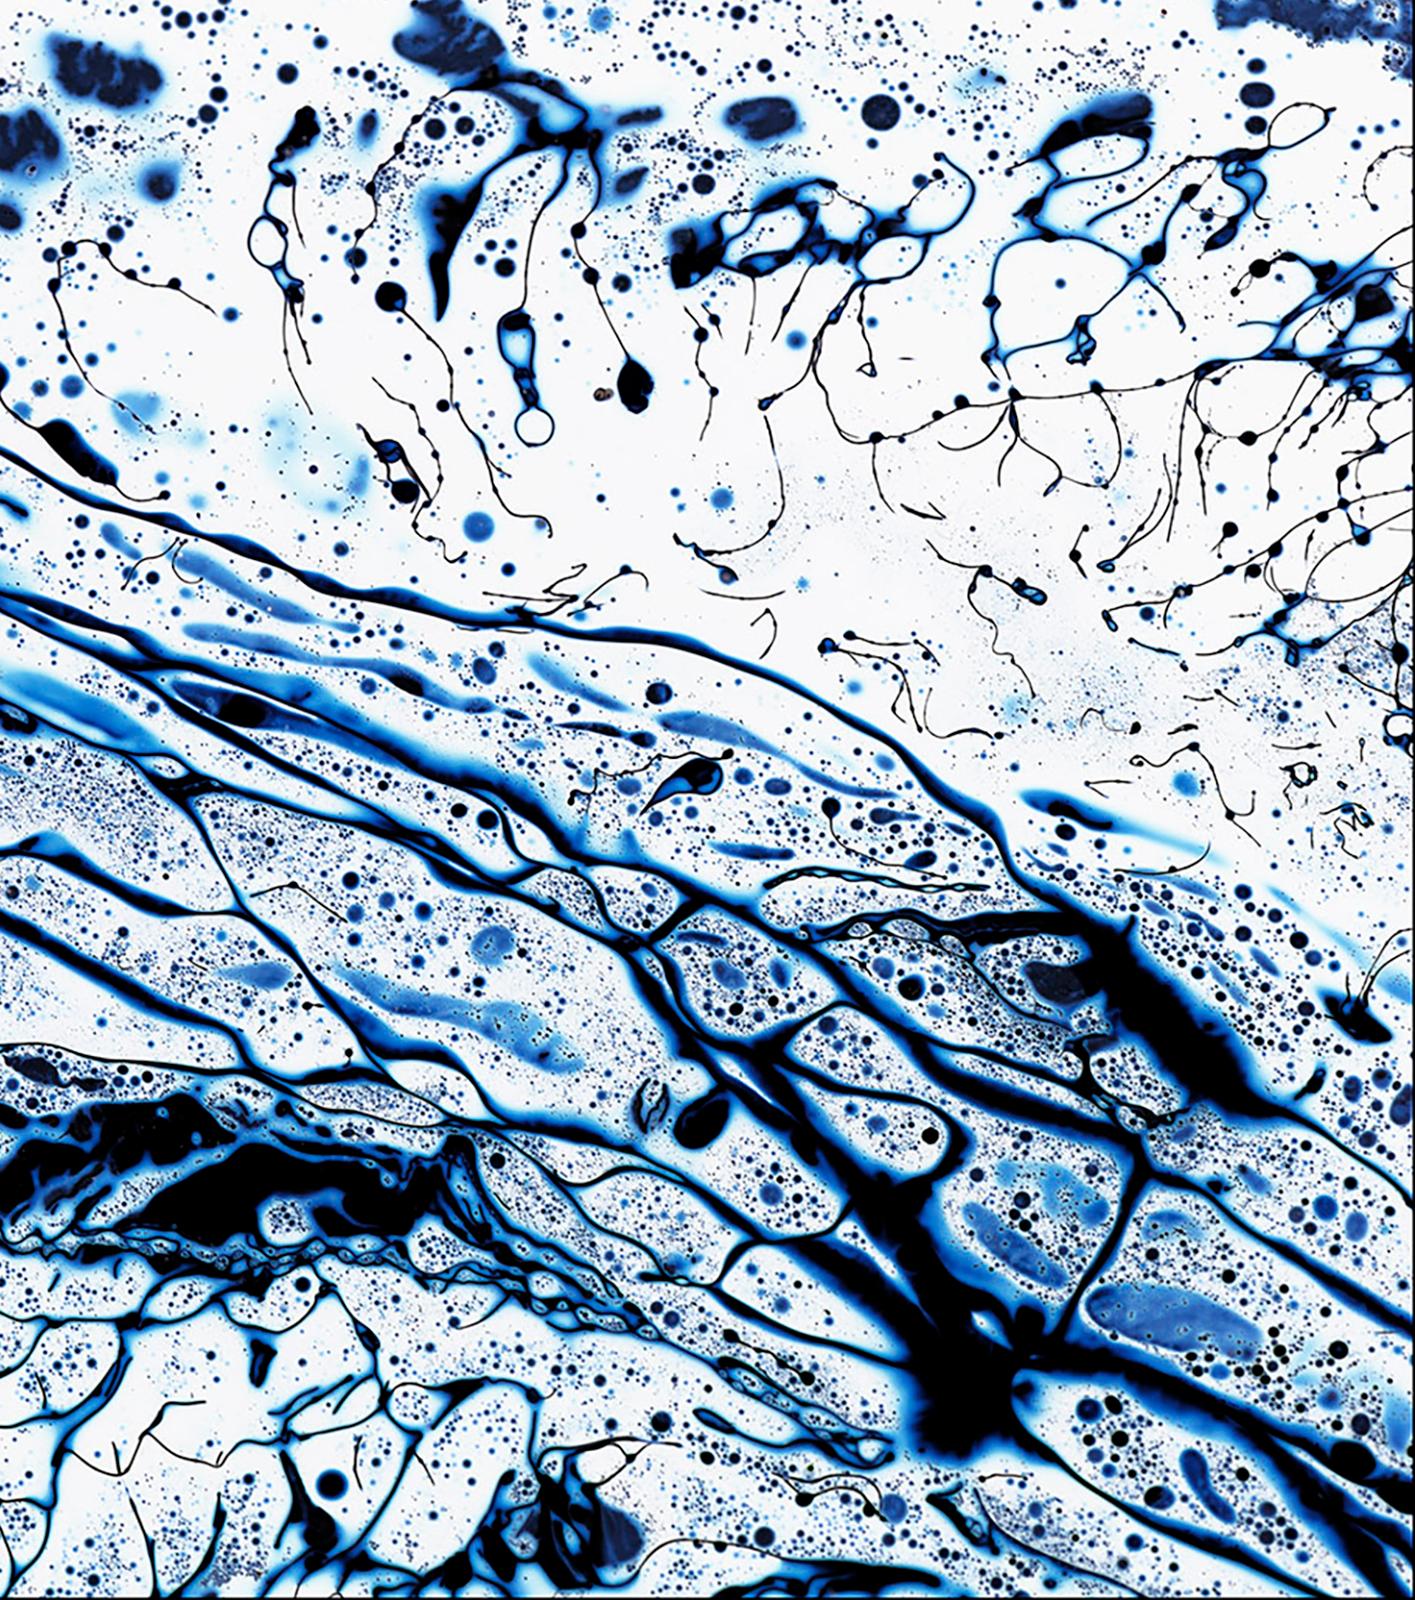 Fluidity 3- Signed limited edition abstract art print, Large format contemporary - Photograph by Michael Banks